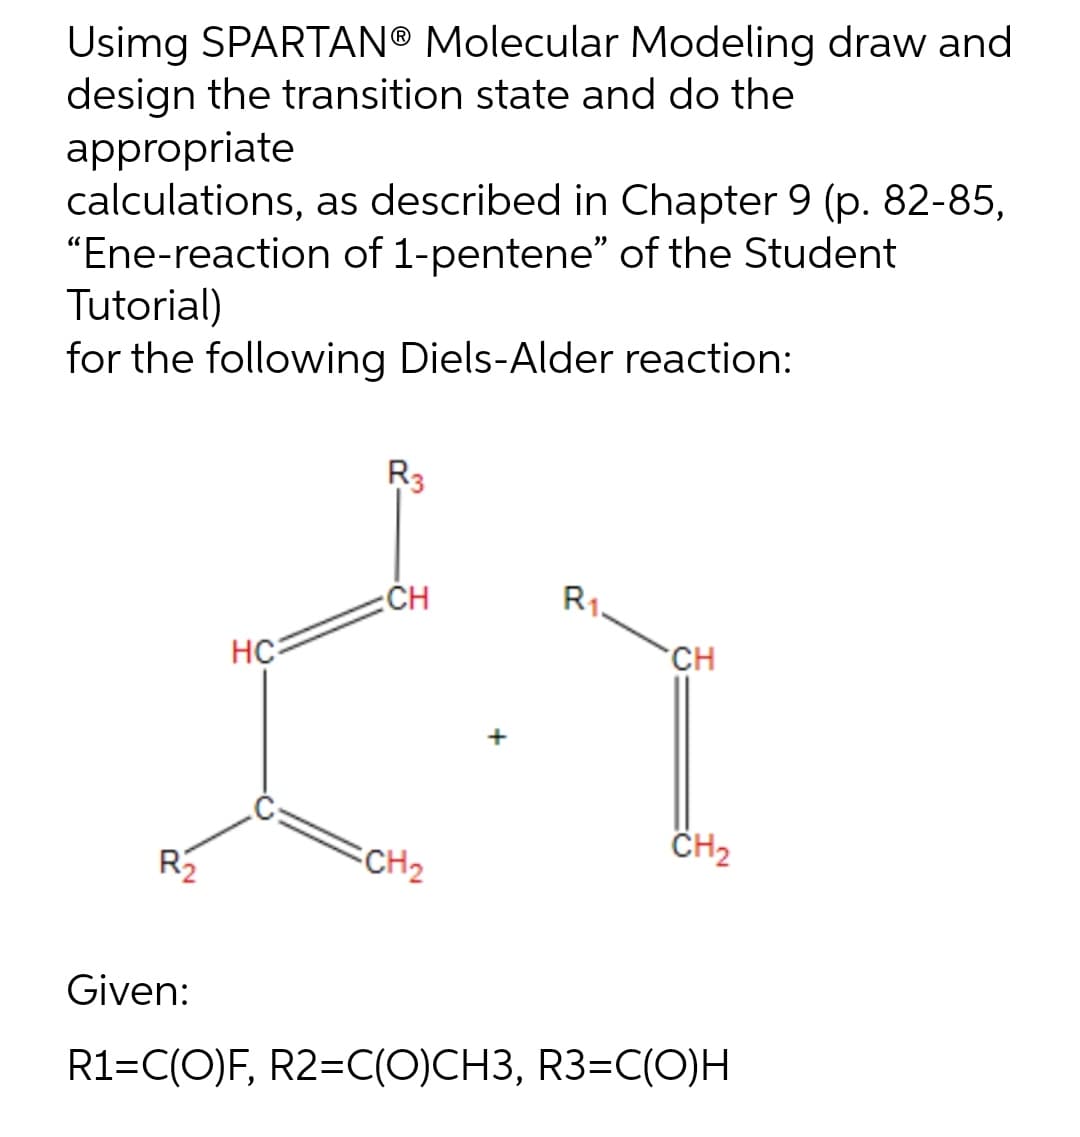 Usimg SPARTAN® Molecular Modeling draw and
design the transition state and do the
appropriate
calculations, as described in Chapter 9 (p. 82-85,
"Ene-reaction of 1-pentene" of the Student
Tutorial)
for the following Diels-Alder reaction:
R3
CH
R1
HC
CH
CH₂
=CH ₂
R₂
Given:
R1=C(O)F, R2=C(O)CH3, R3=C(O)H